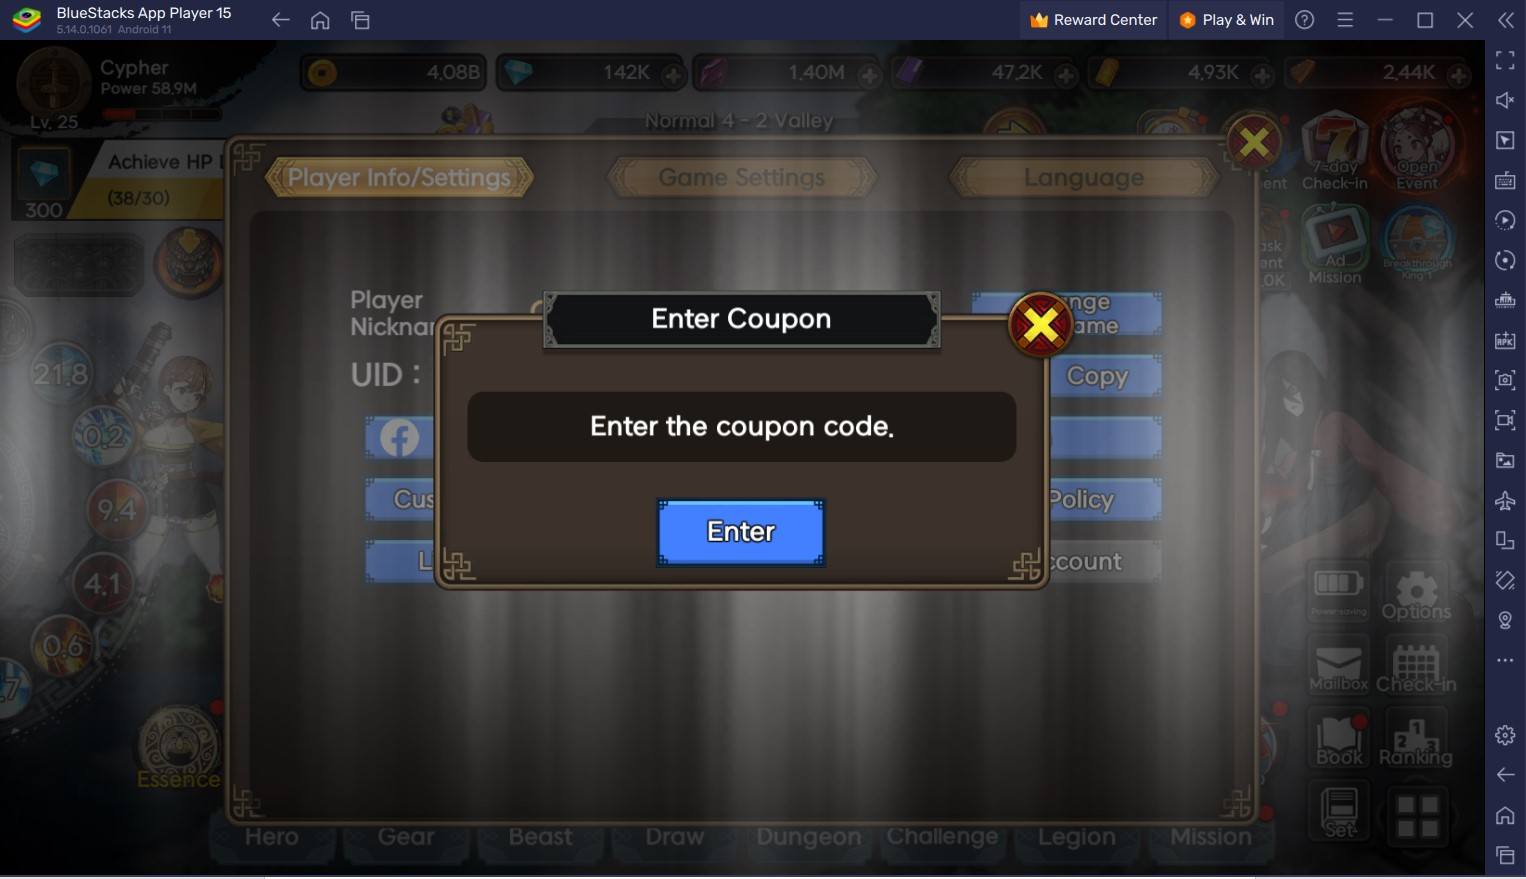 4 New Redemption Codes from 3.8 Special Program